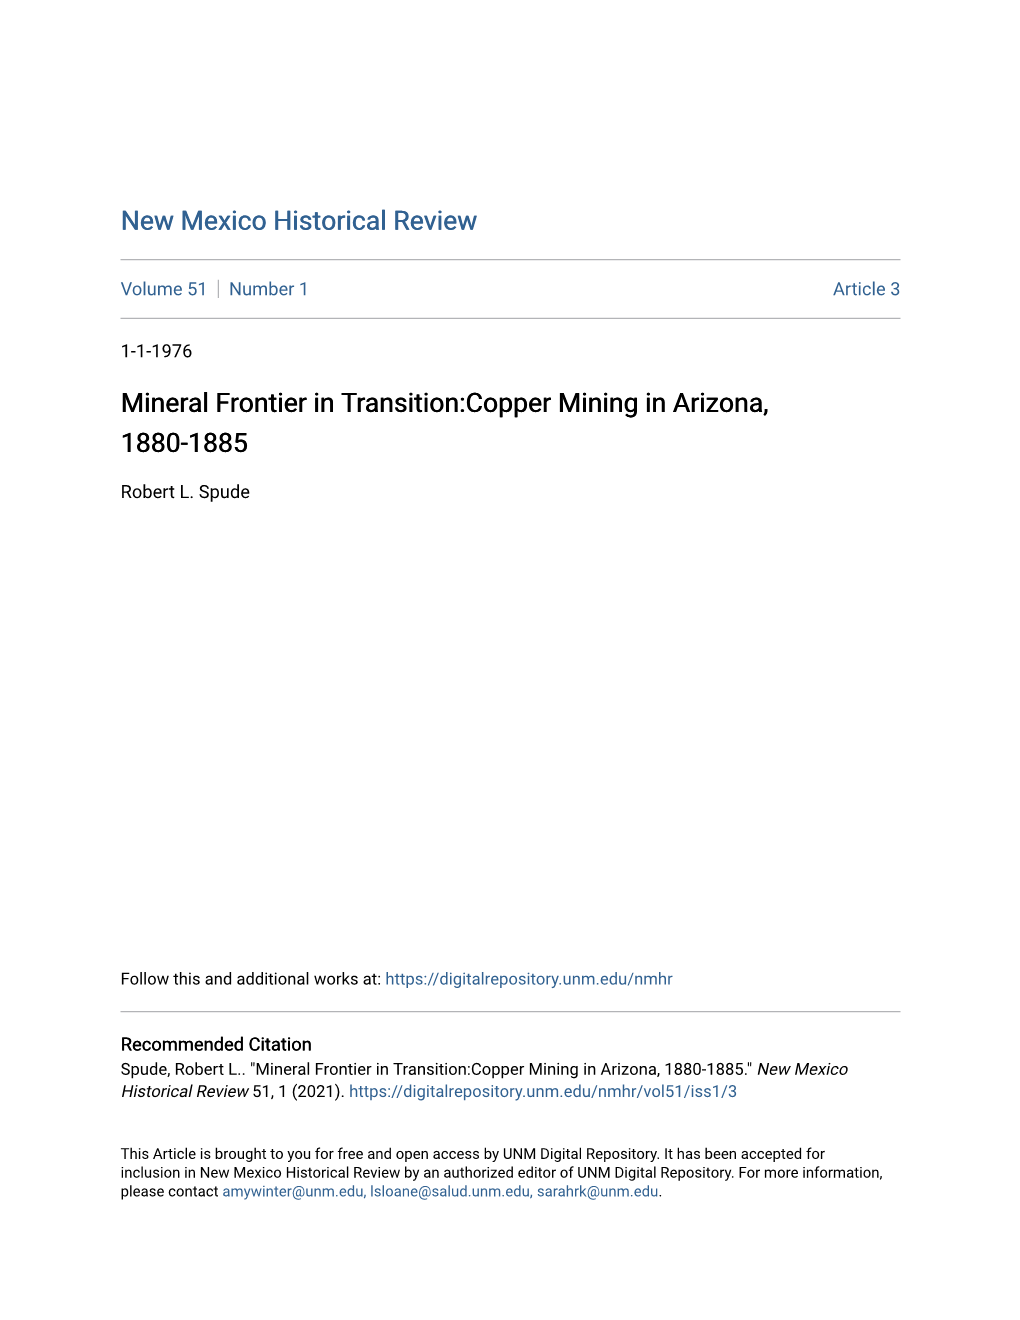 Mineral Frontier in Transition:Copper Mining in Arizona, 1880-1885